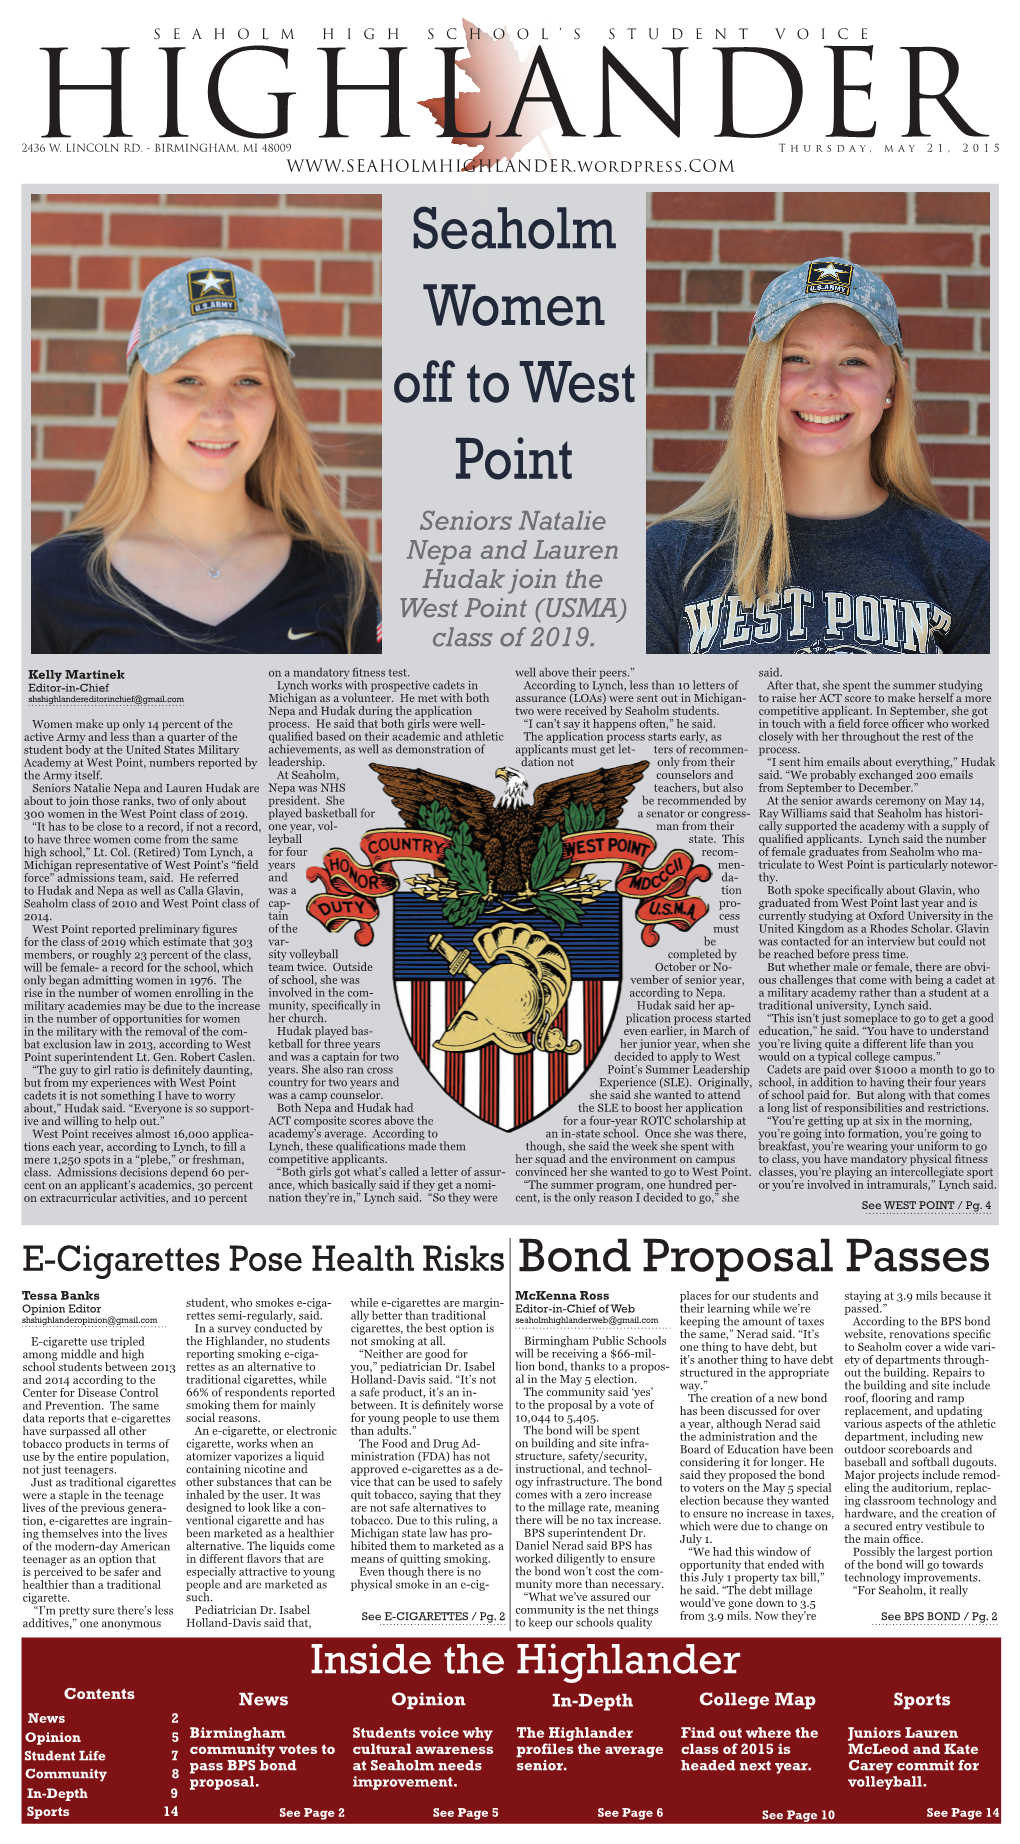 Seaholm Women Off to West Point Seniors Natalie Nepa and Lauren Hudak Join the West Point (USMA) Class of 2019